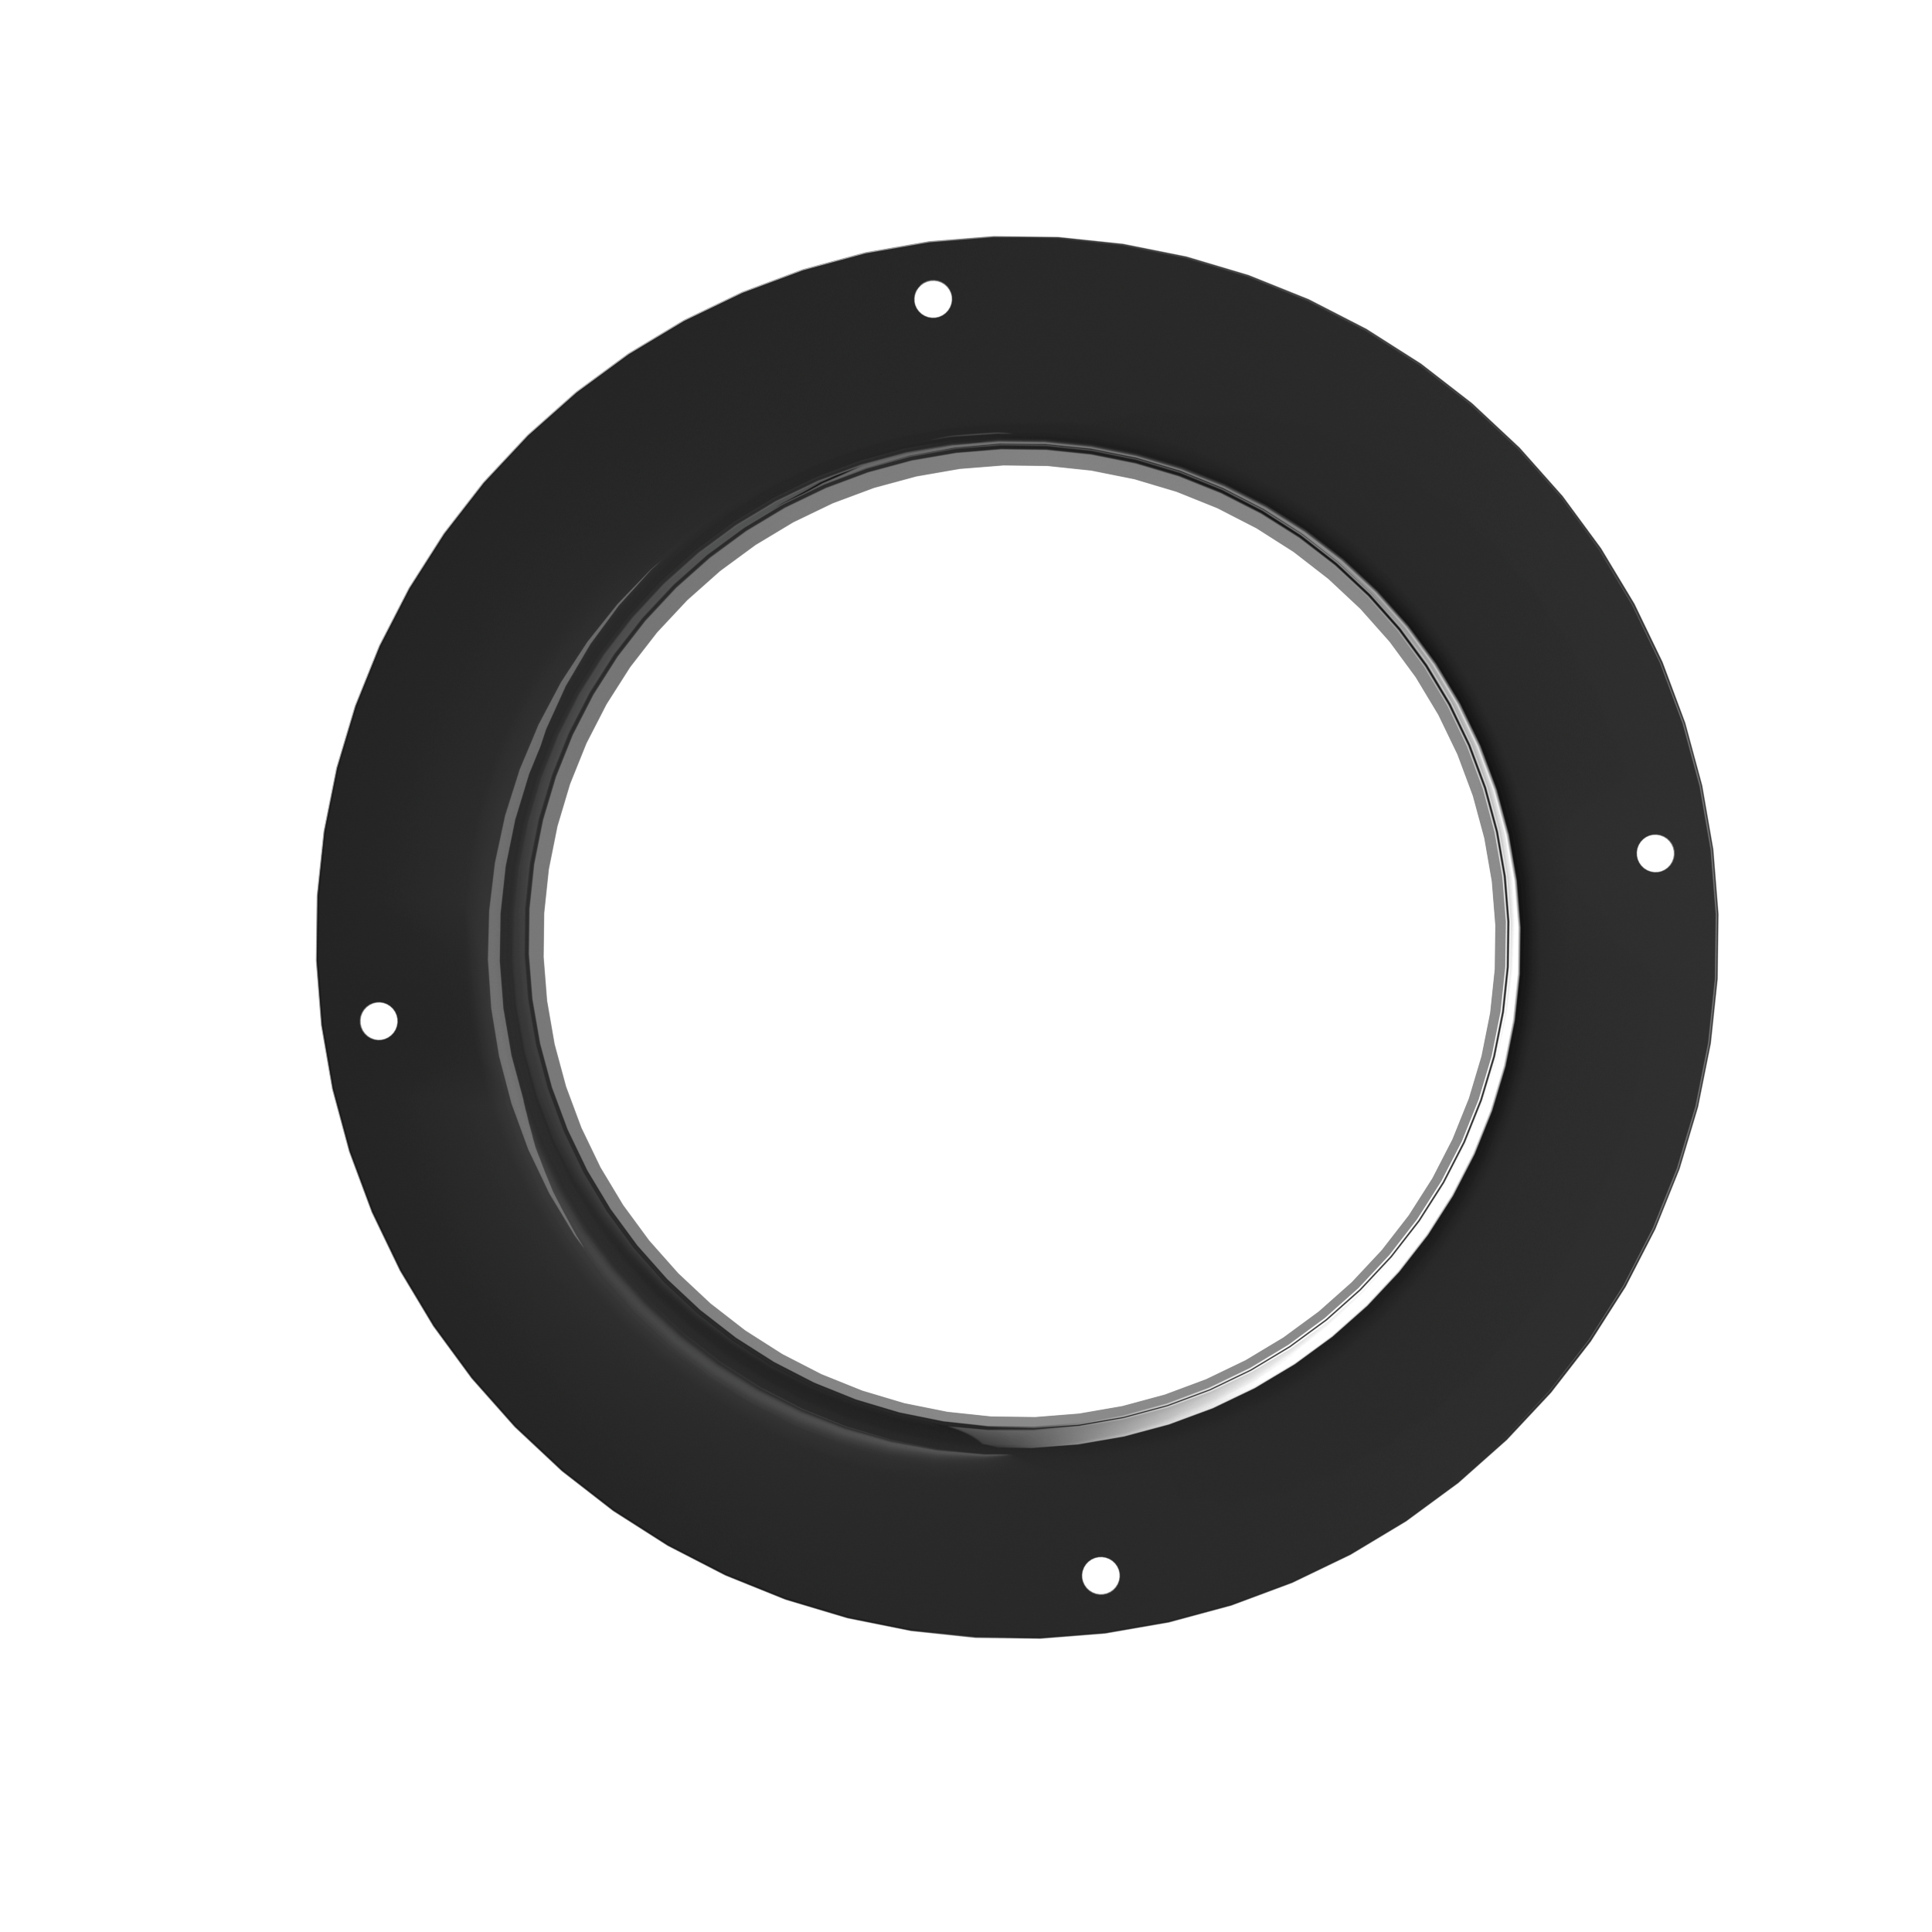 Black Plastic Duct Connector Straight Pipe Flange